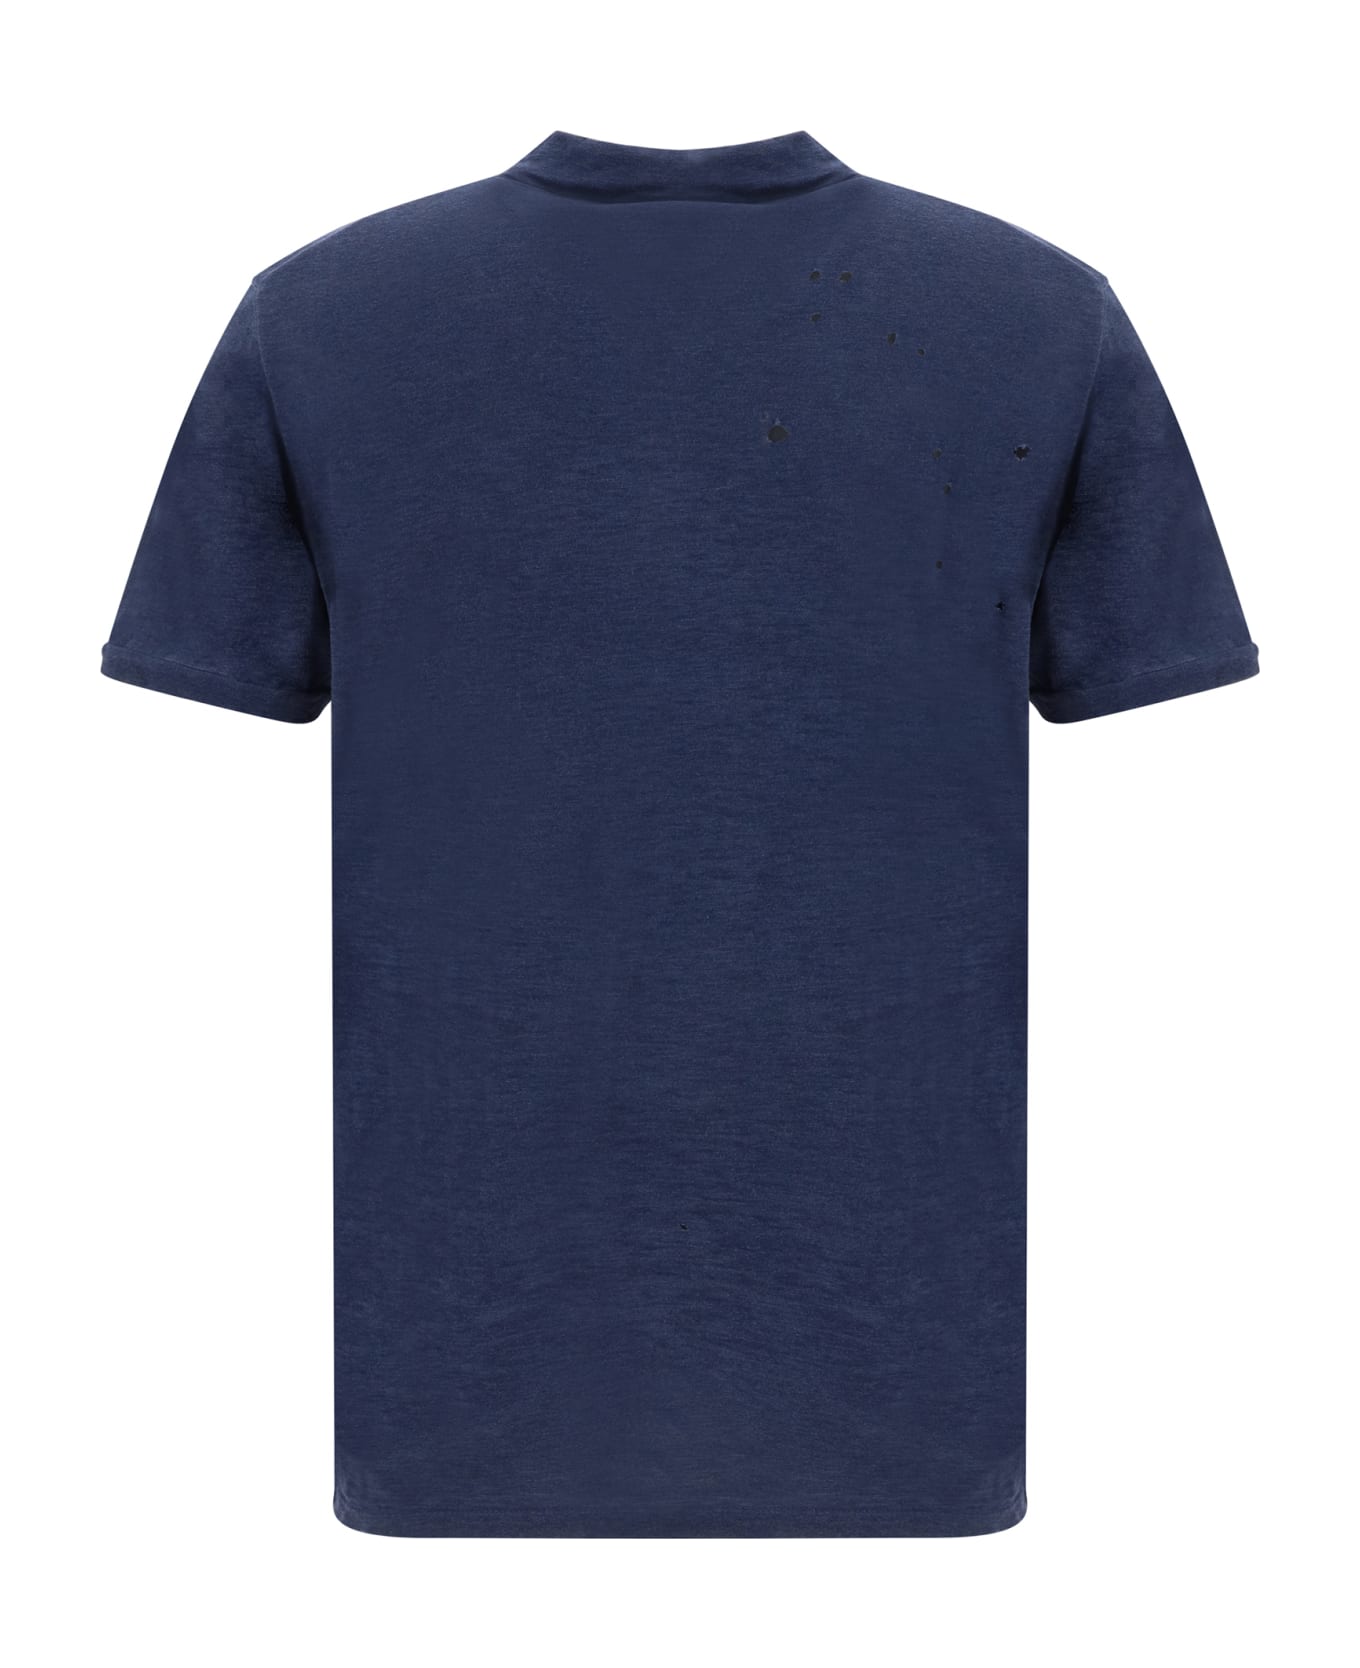 Dsquared2 Polo Shirt - Navy Blue